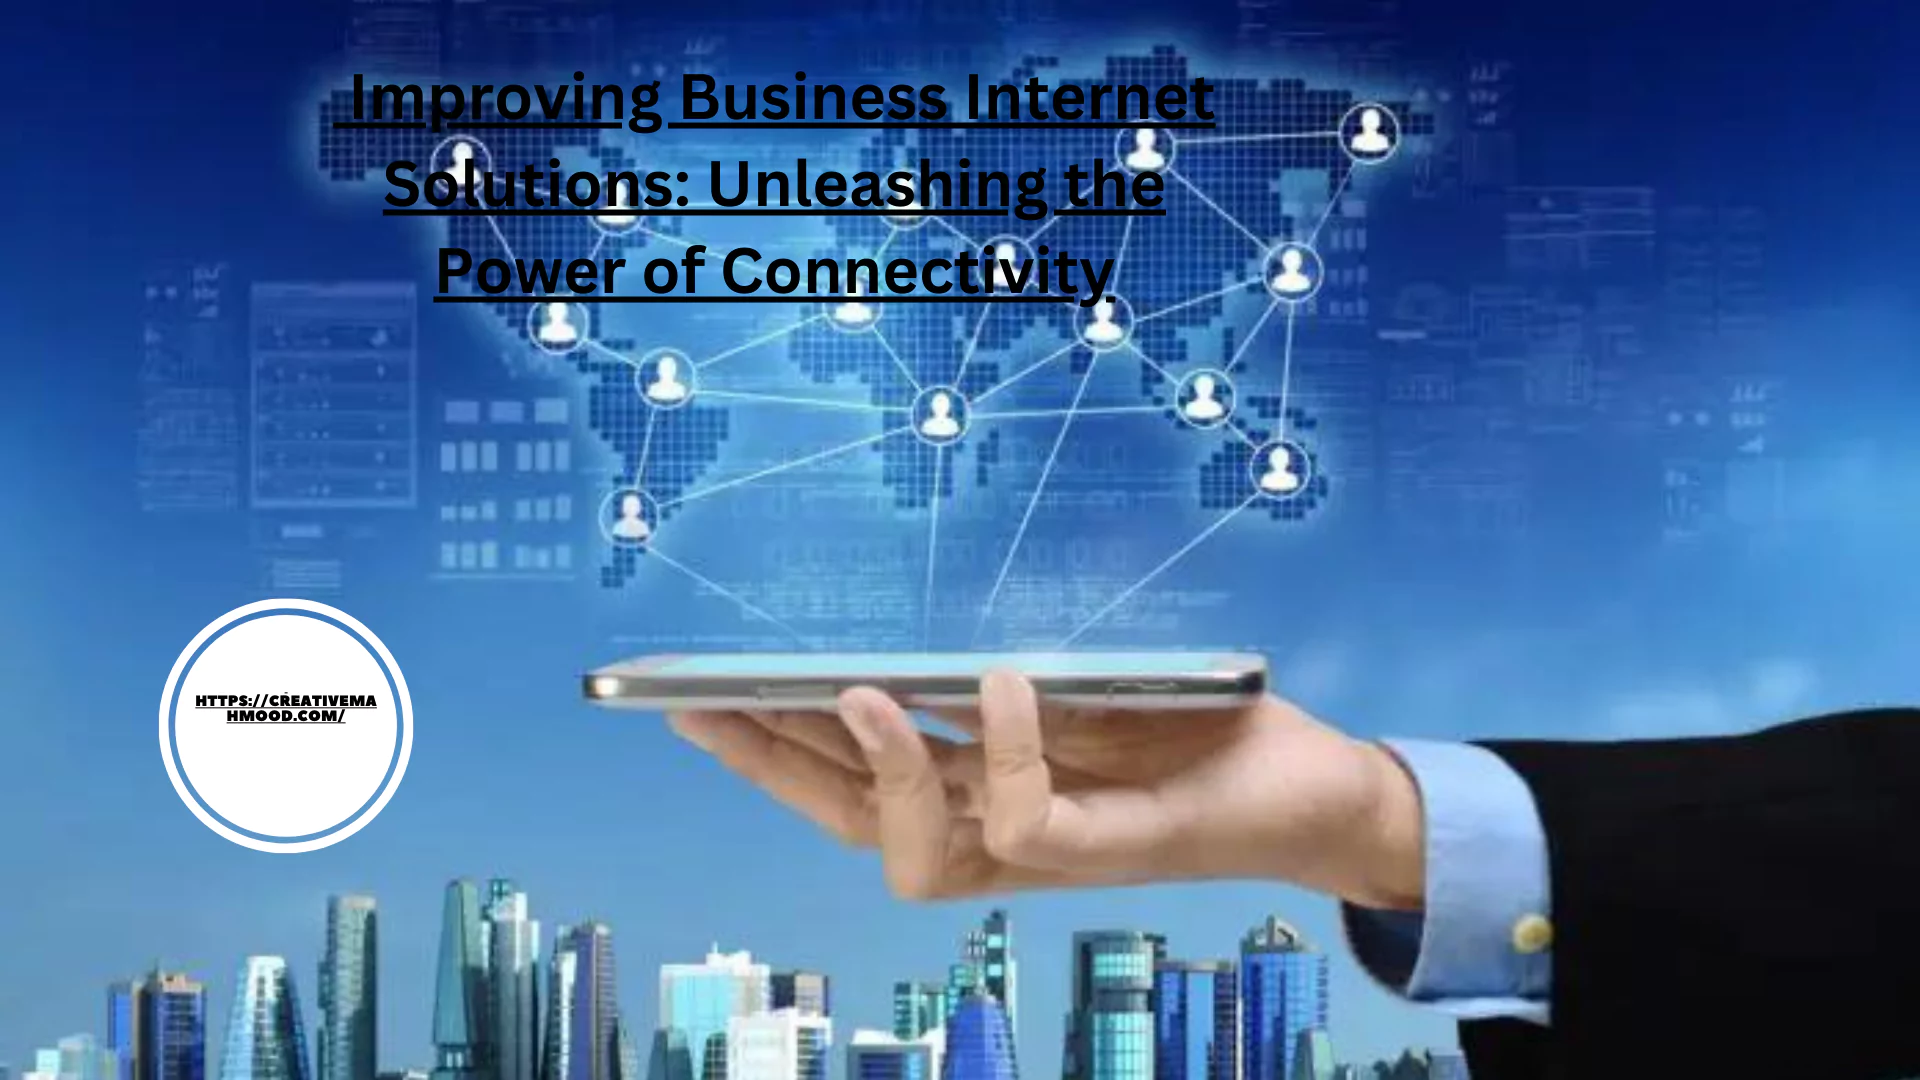 Improving Business Internet Solutions: Unleashing the Power of Connectivity